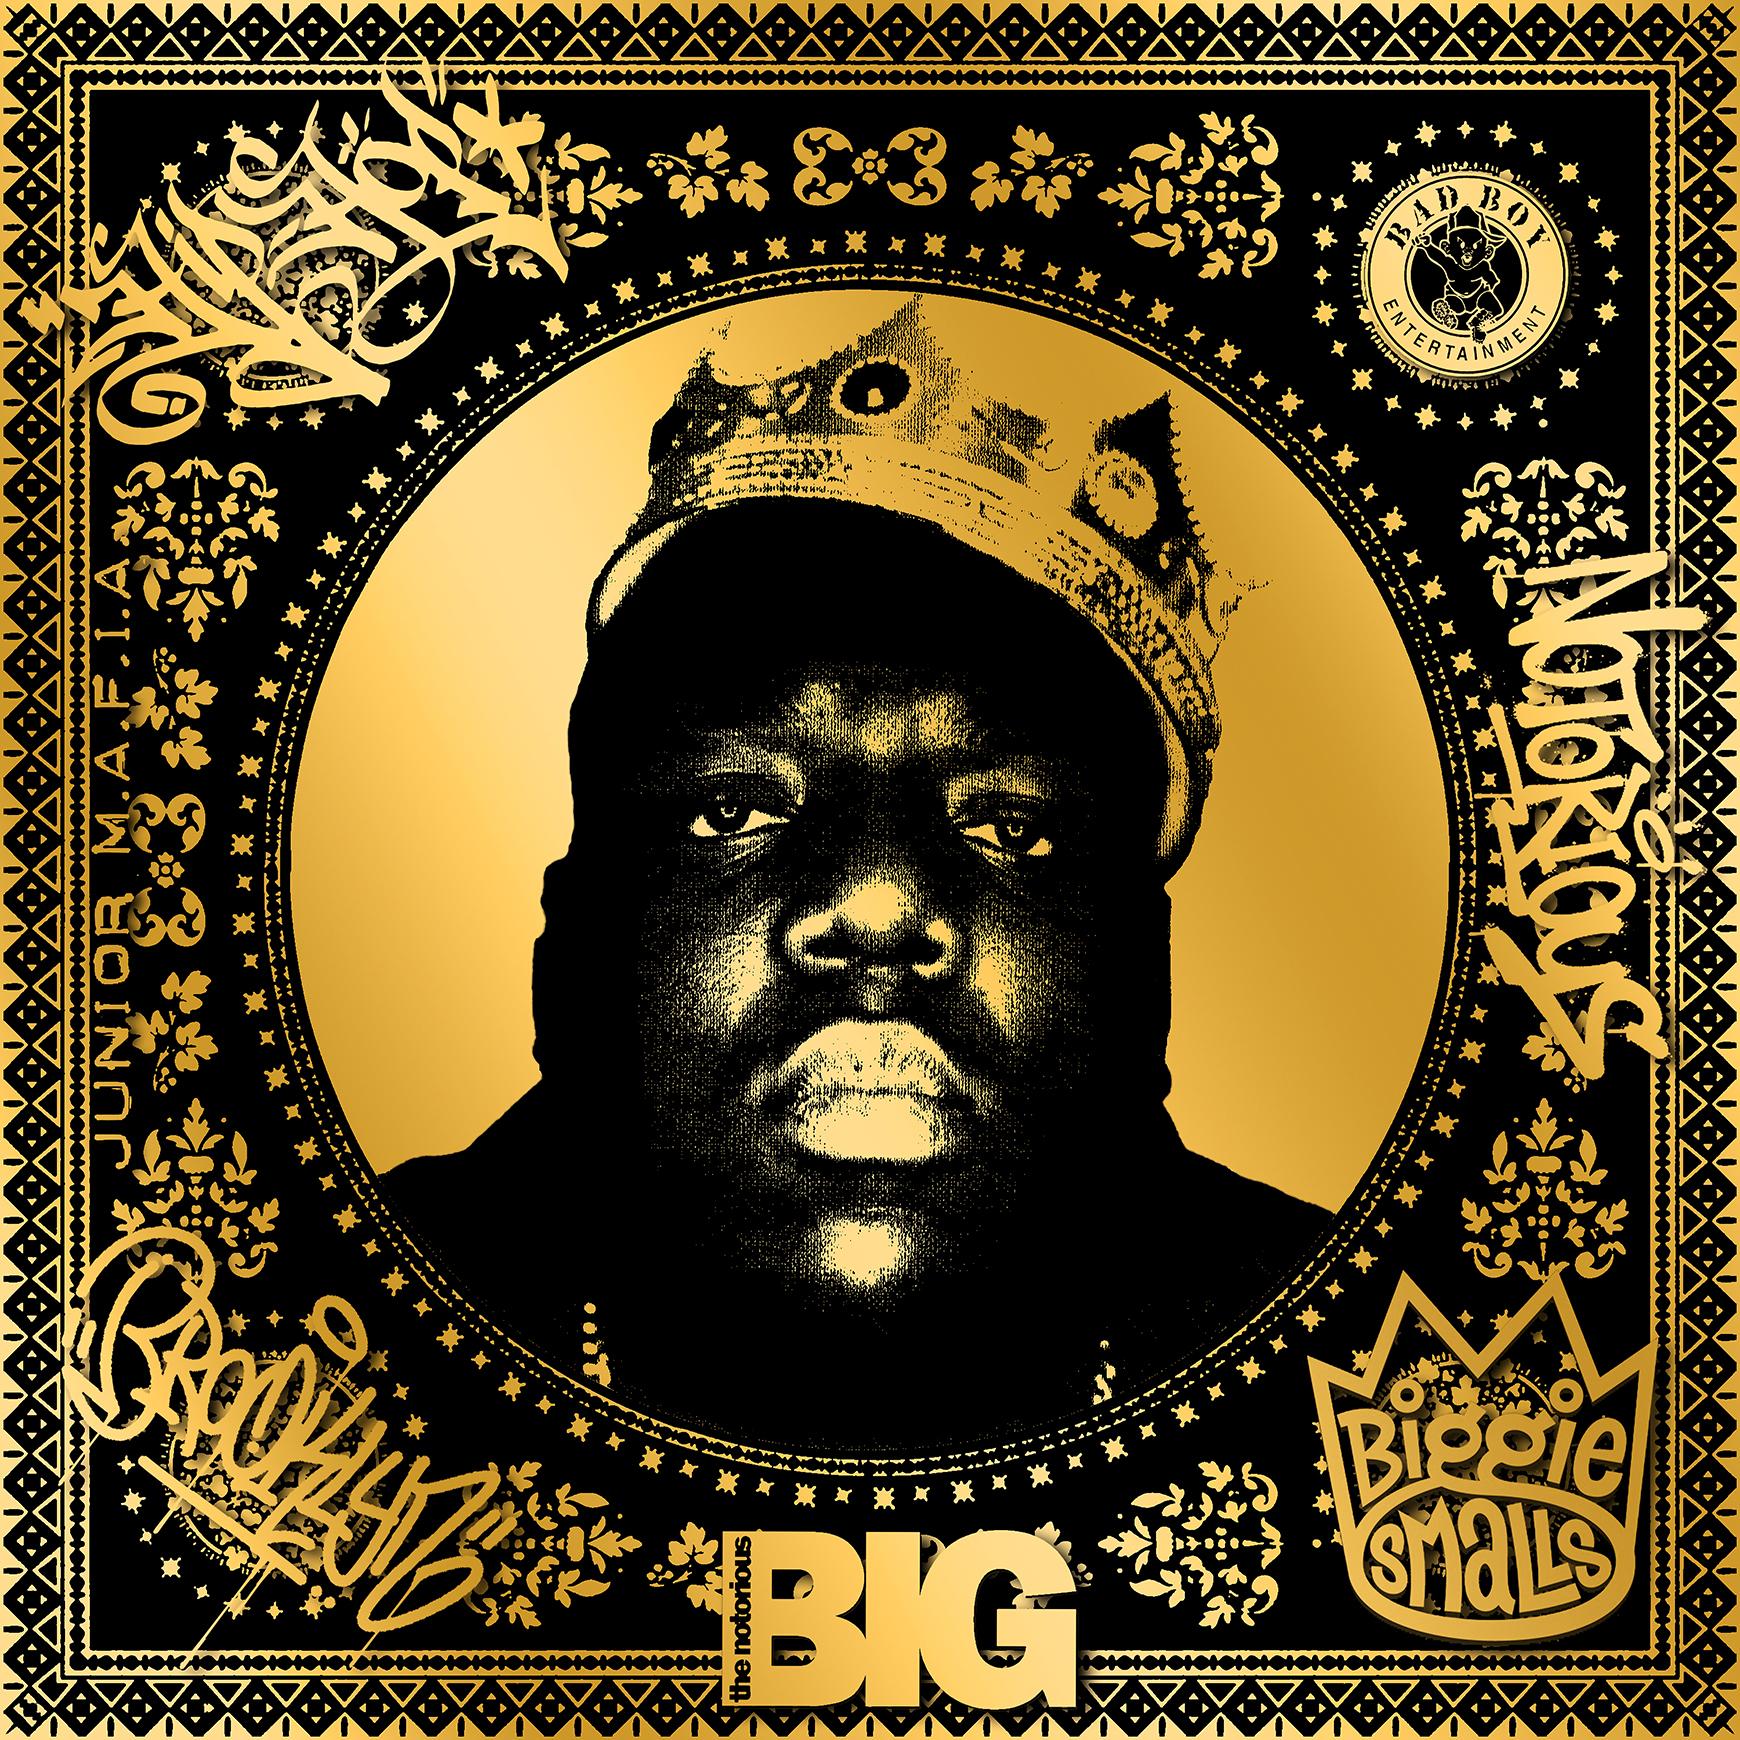 Notorious B.I.G (Gold)(50 Years, Hip Hop, Rap, Iconic, Artist, Musician, Rapper) - Print by Agent X